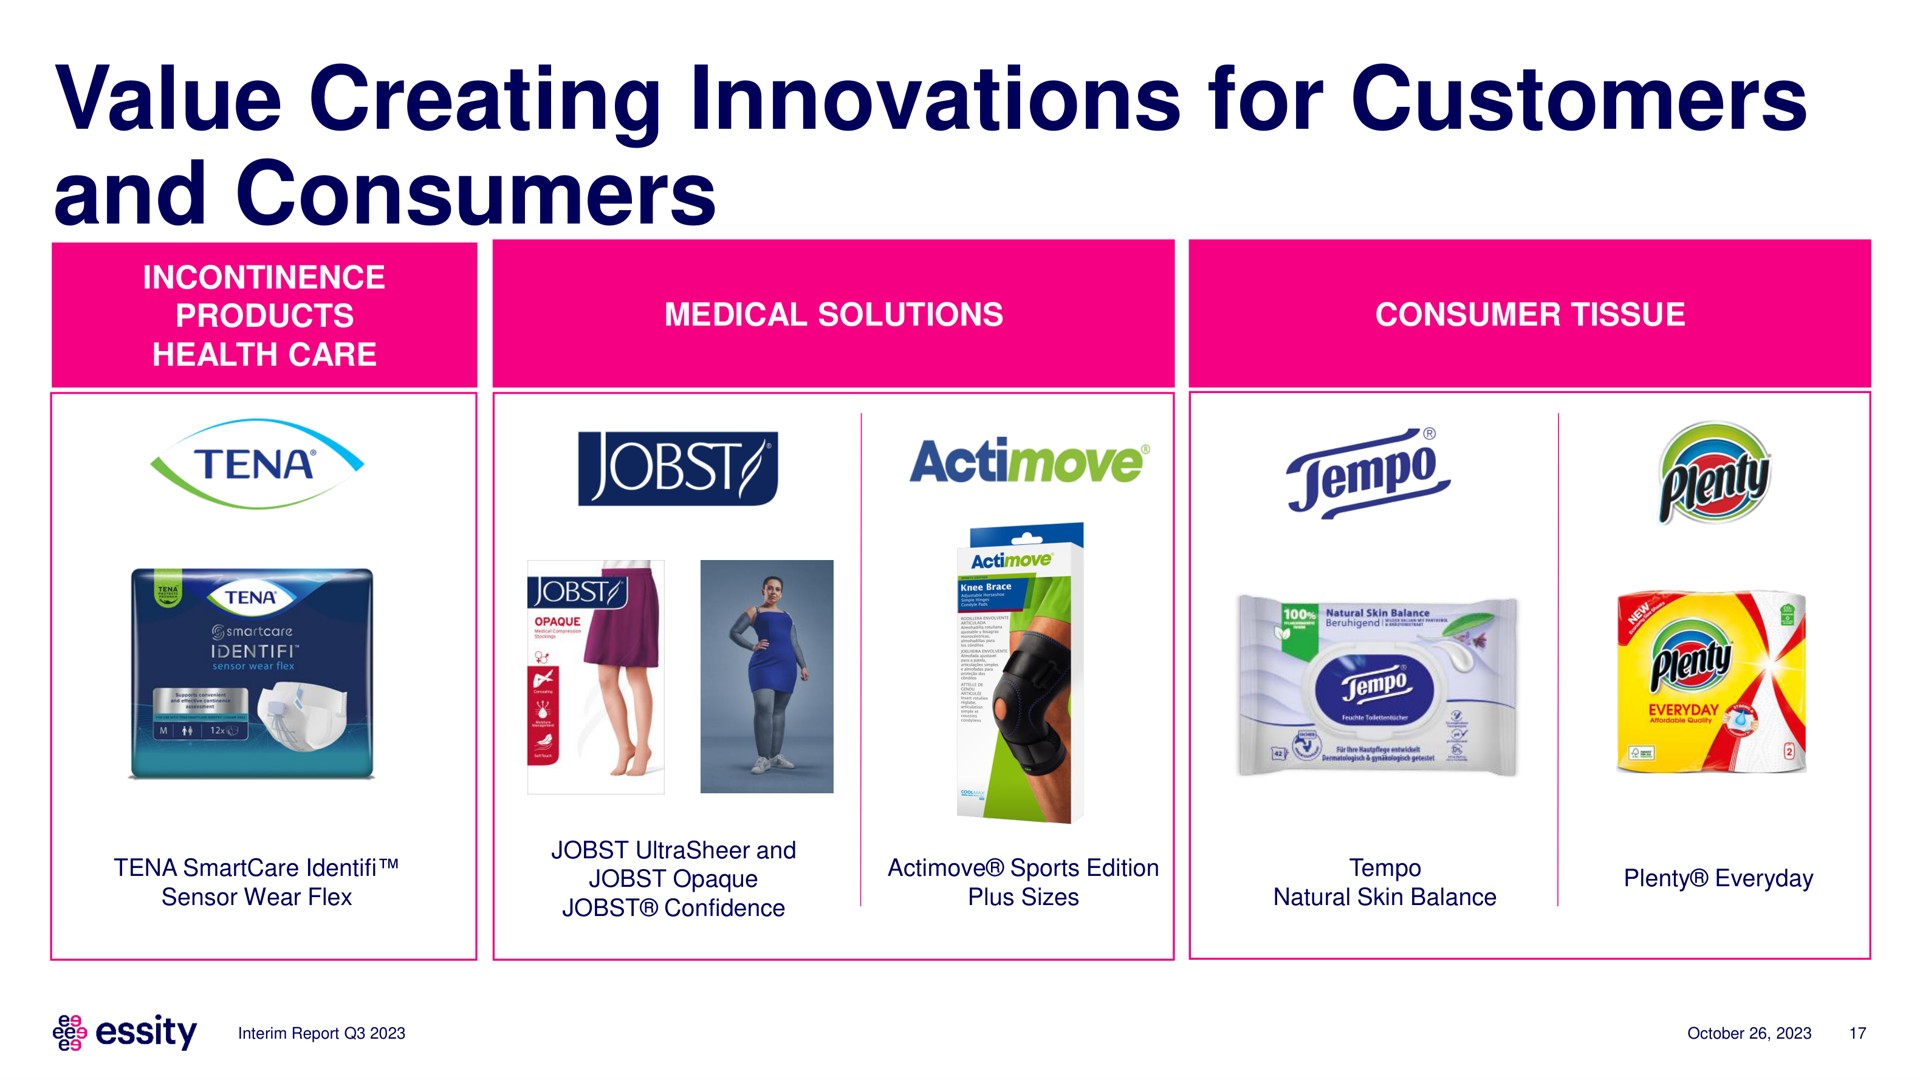 value creating innovations for customers and consumers | Essity